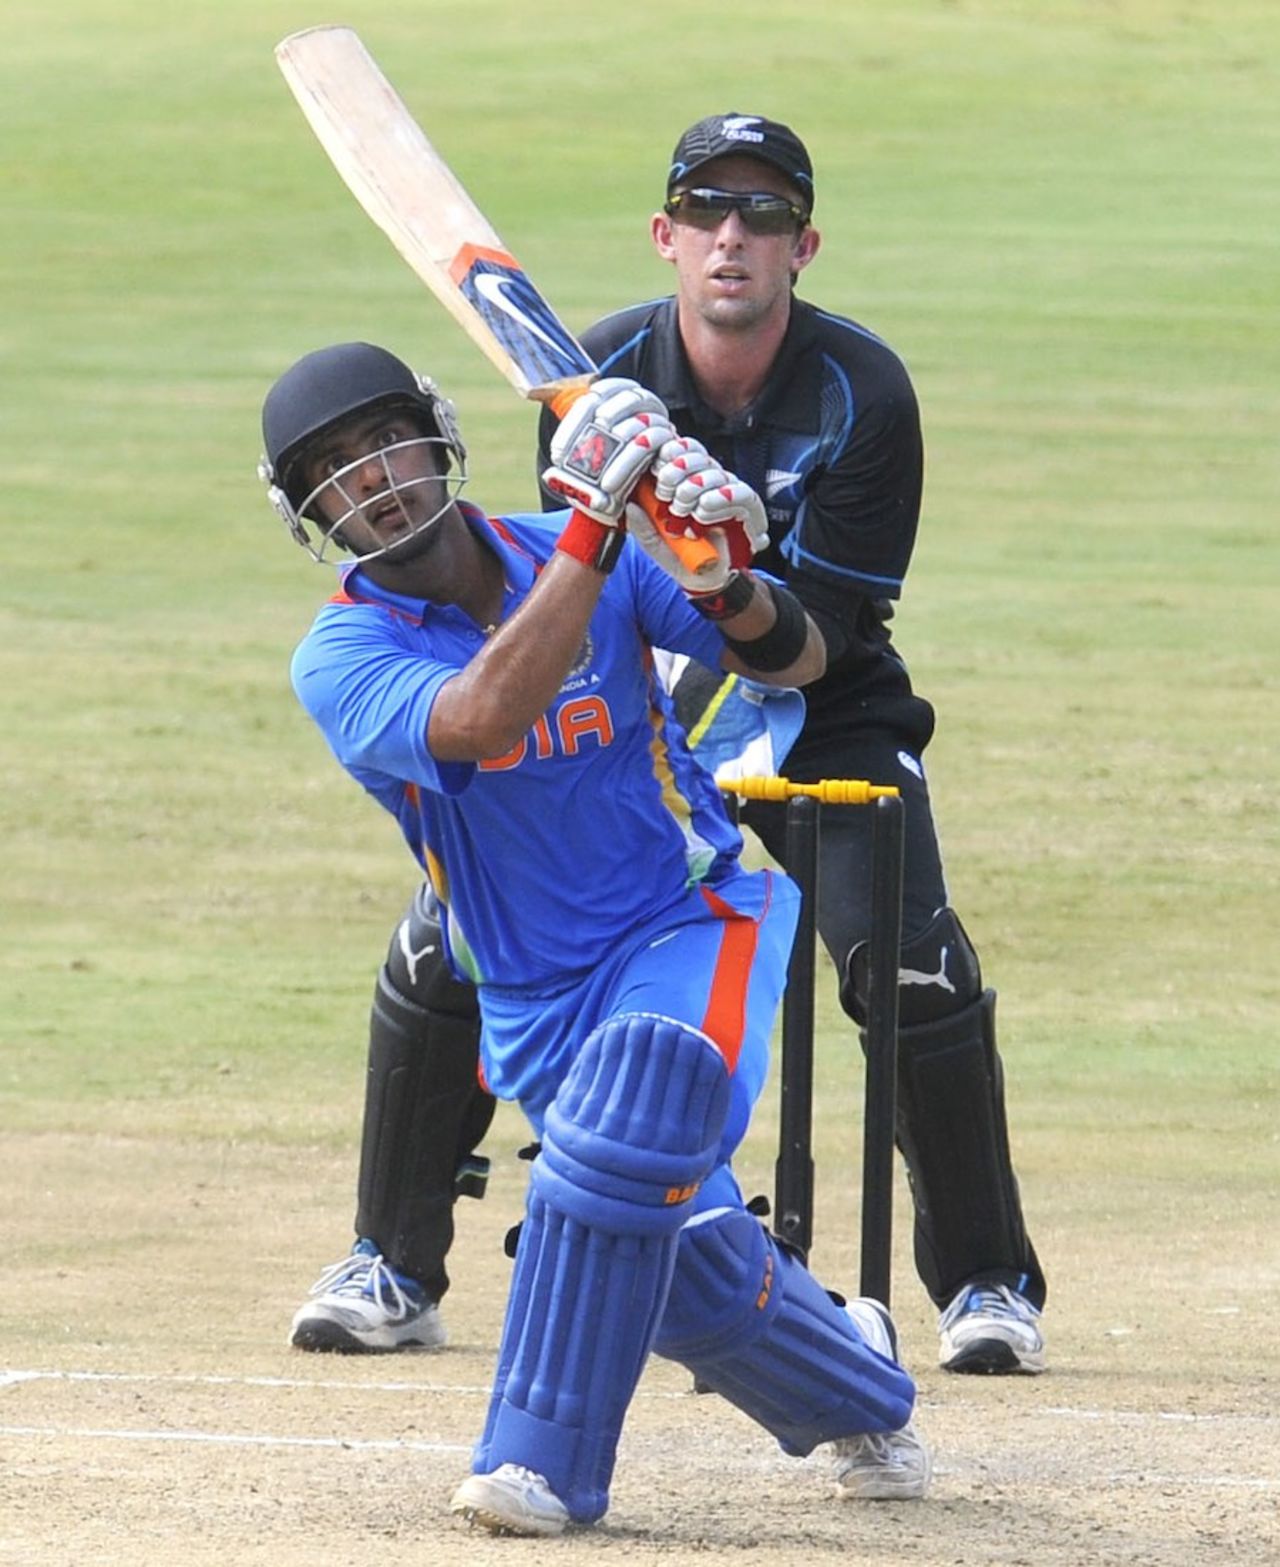 Mandeep Singh lofts during his innings of 59, India A v New Zealand A, 2nd unofficial ODI, Visakhapatnam, September 10, 2013